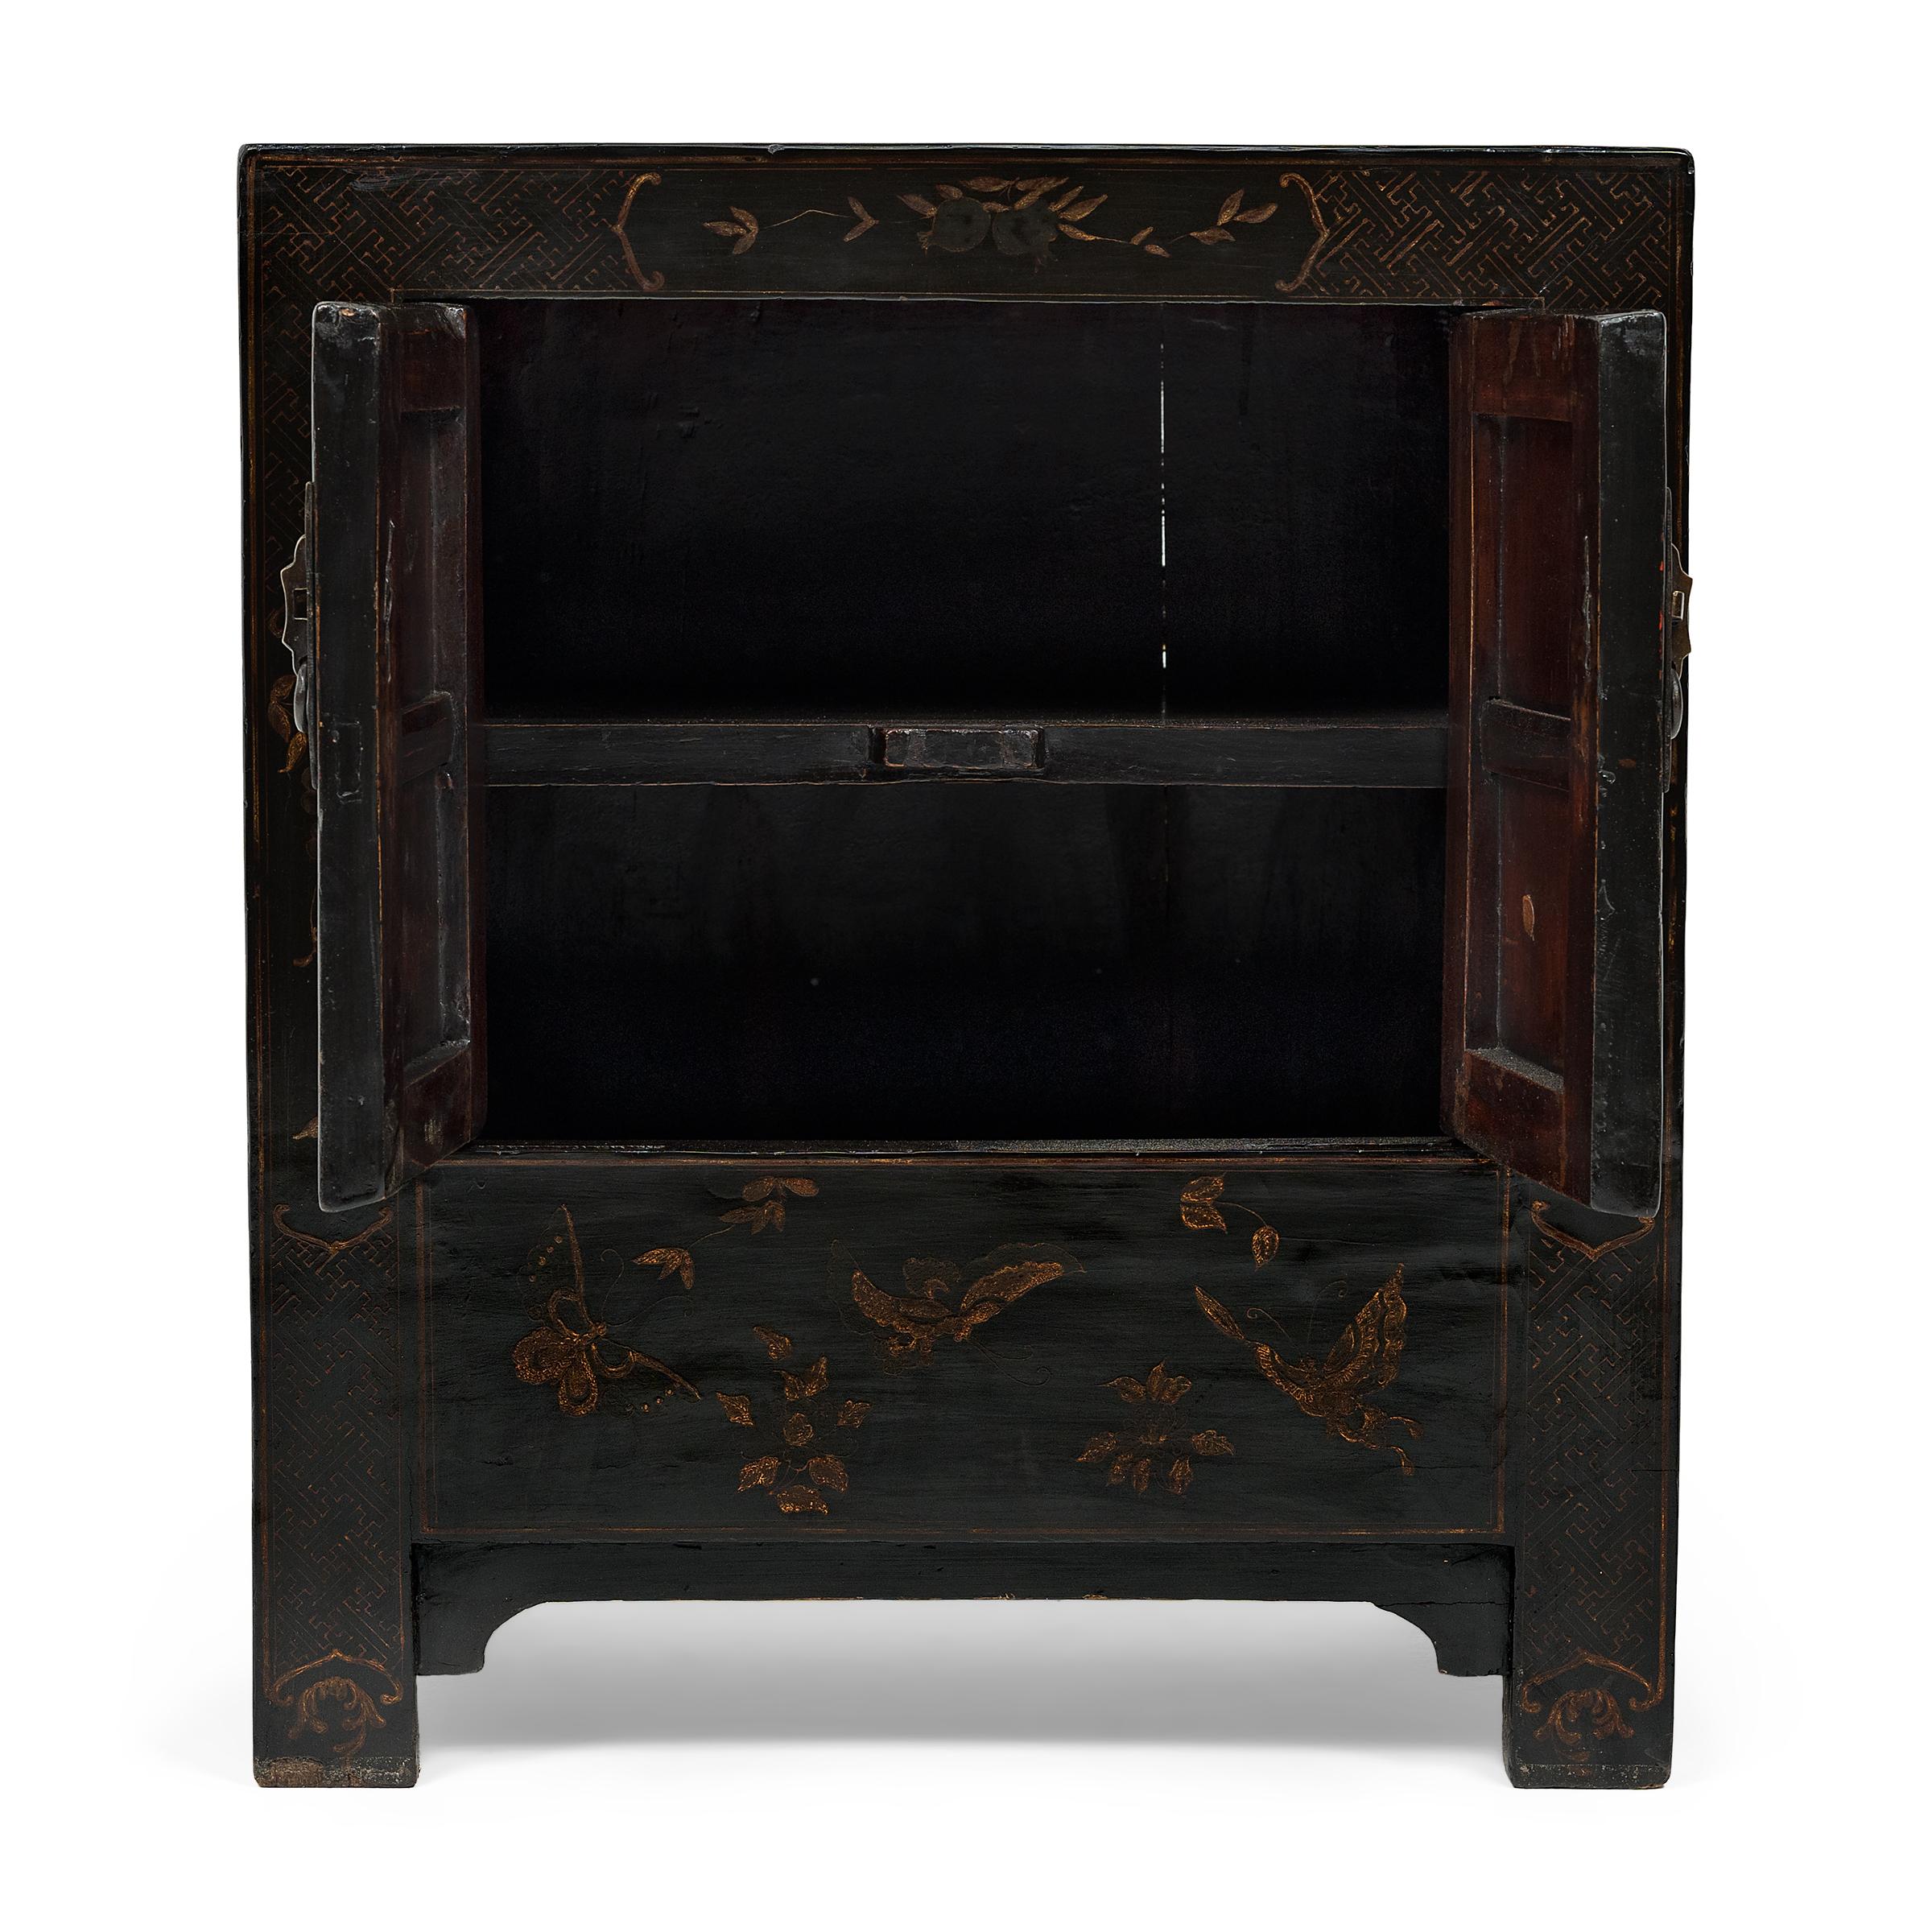 Wood Chinese Gilt Butterfly Locking Cabinet, c. 1850